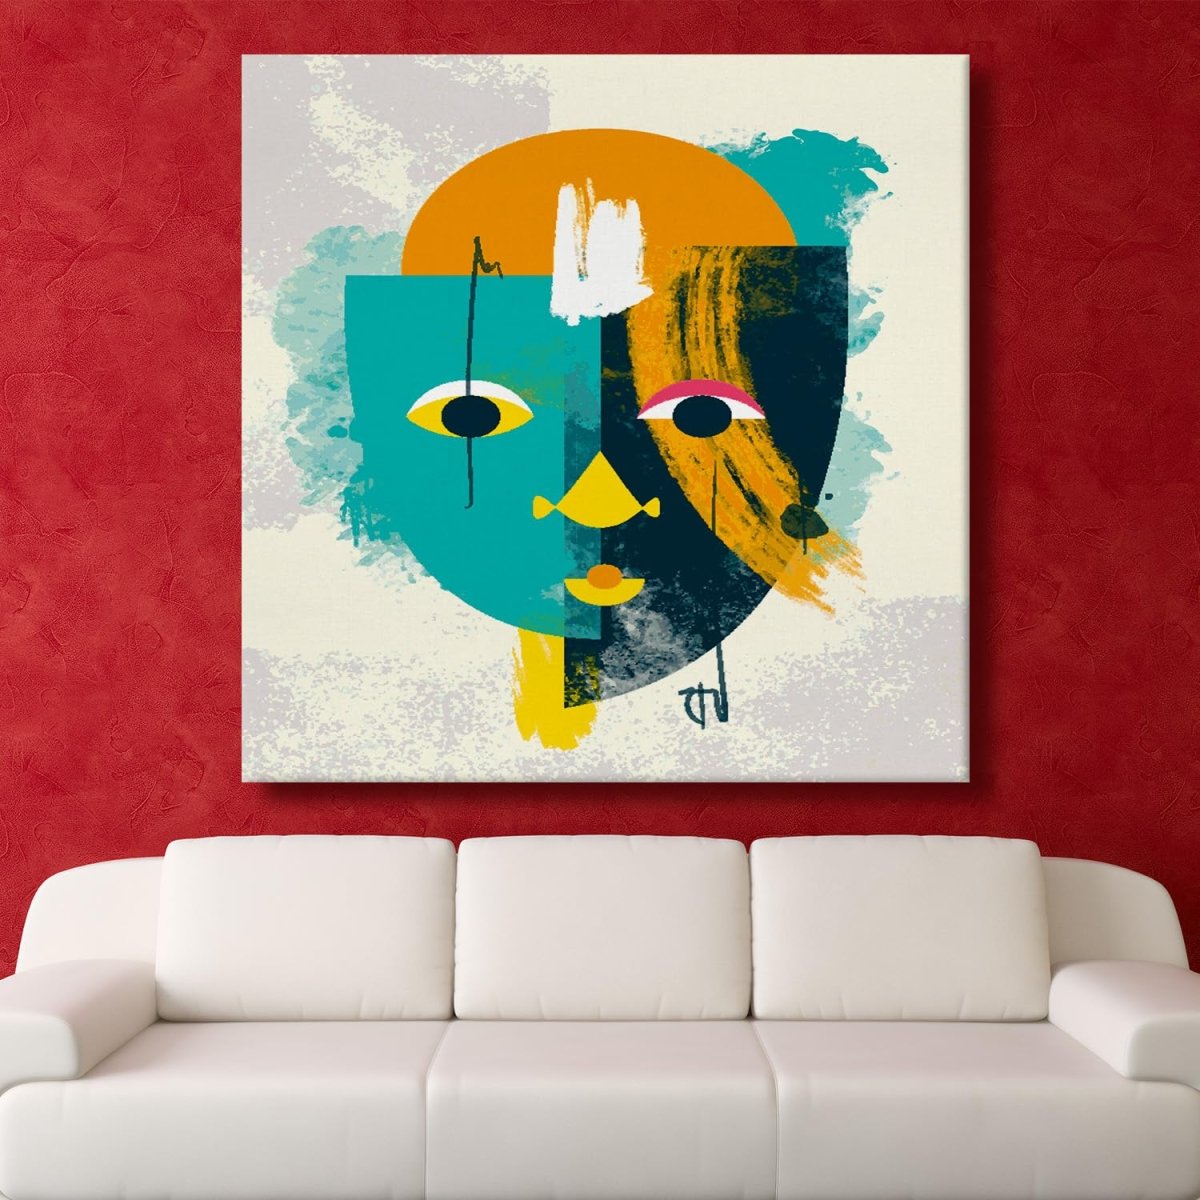 A Study in Angles Canvas Wall Art (36 x 36 Inches)